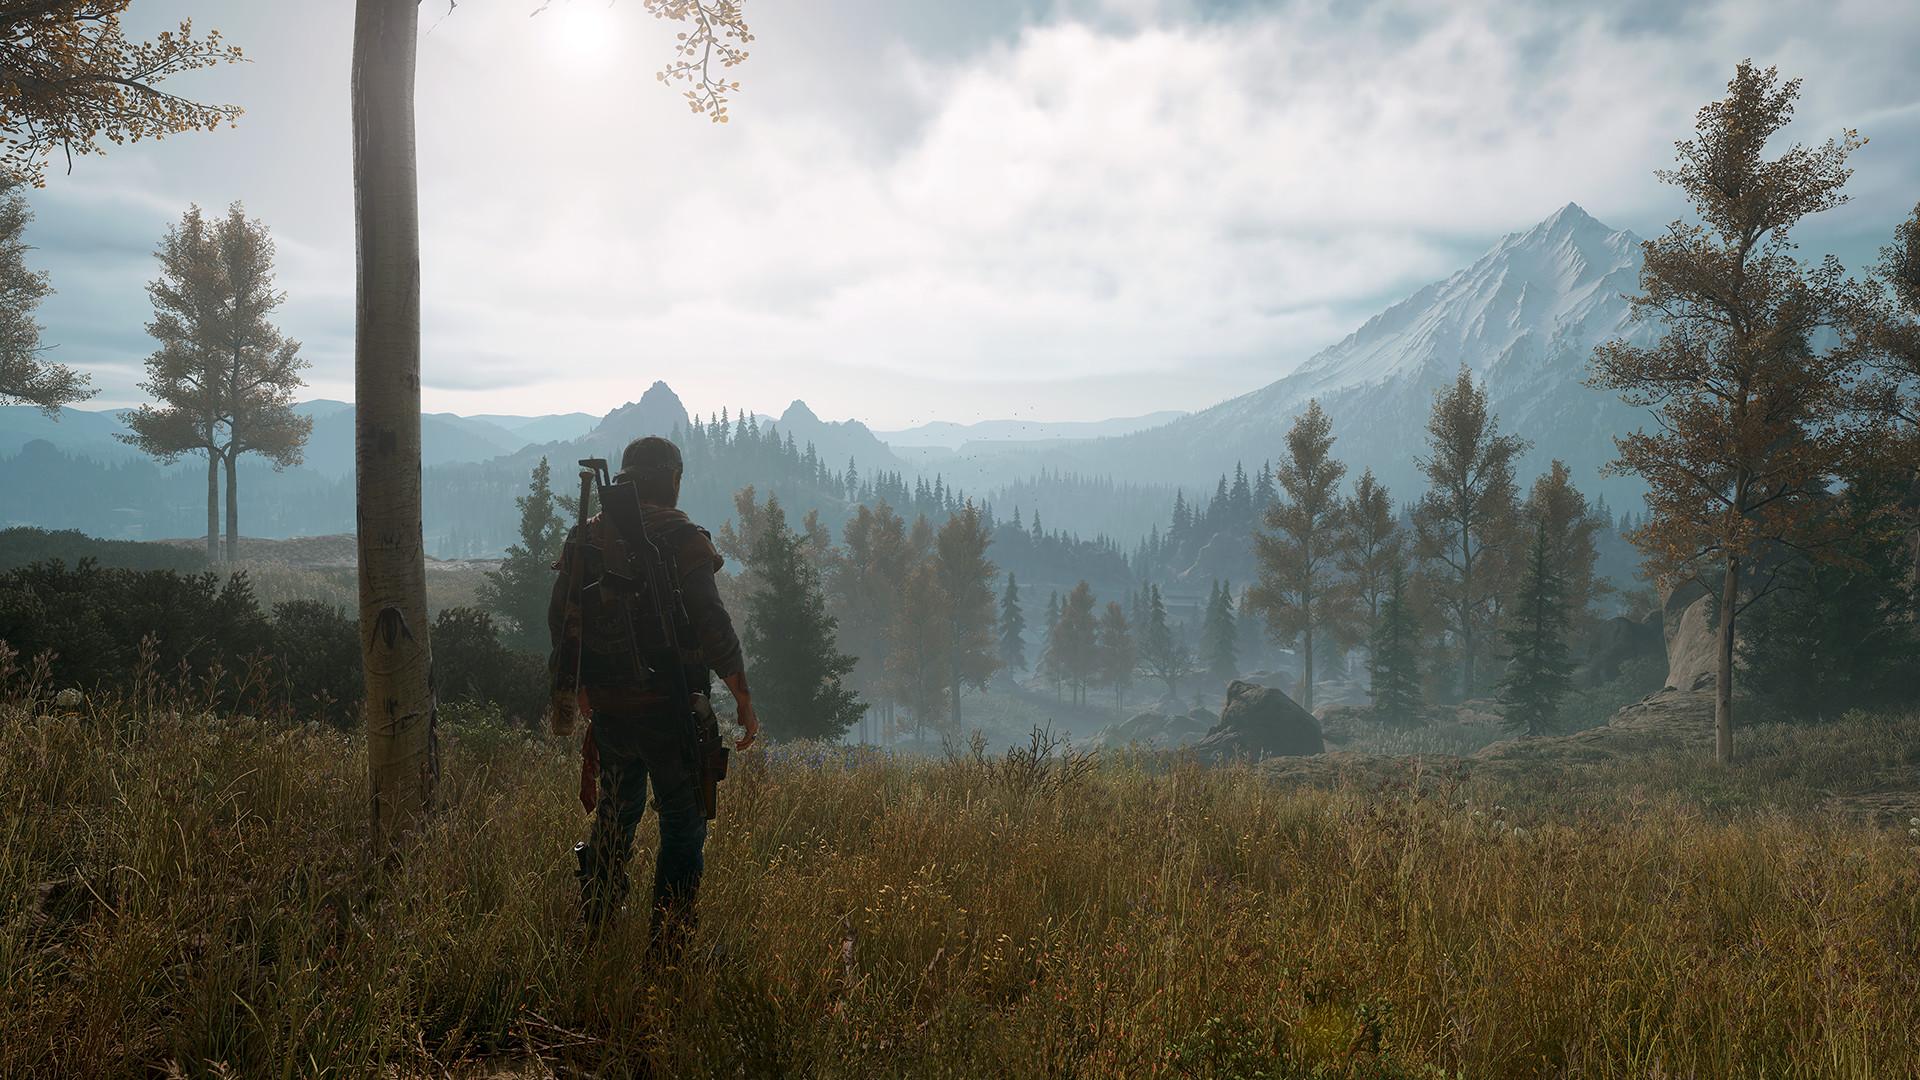 Screenshot №6 from game Days Gone